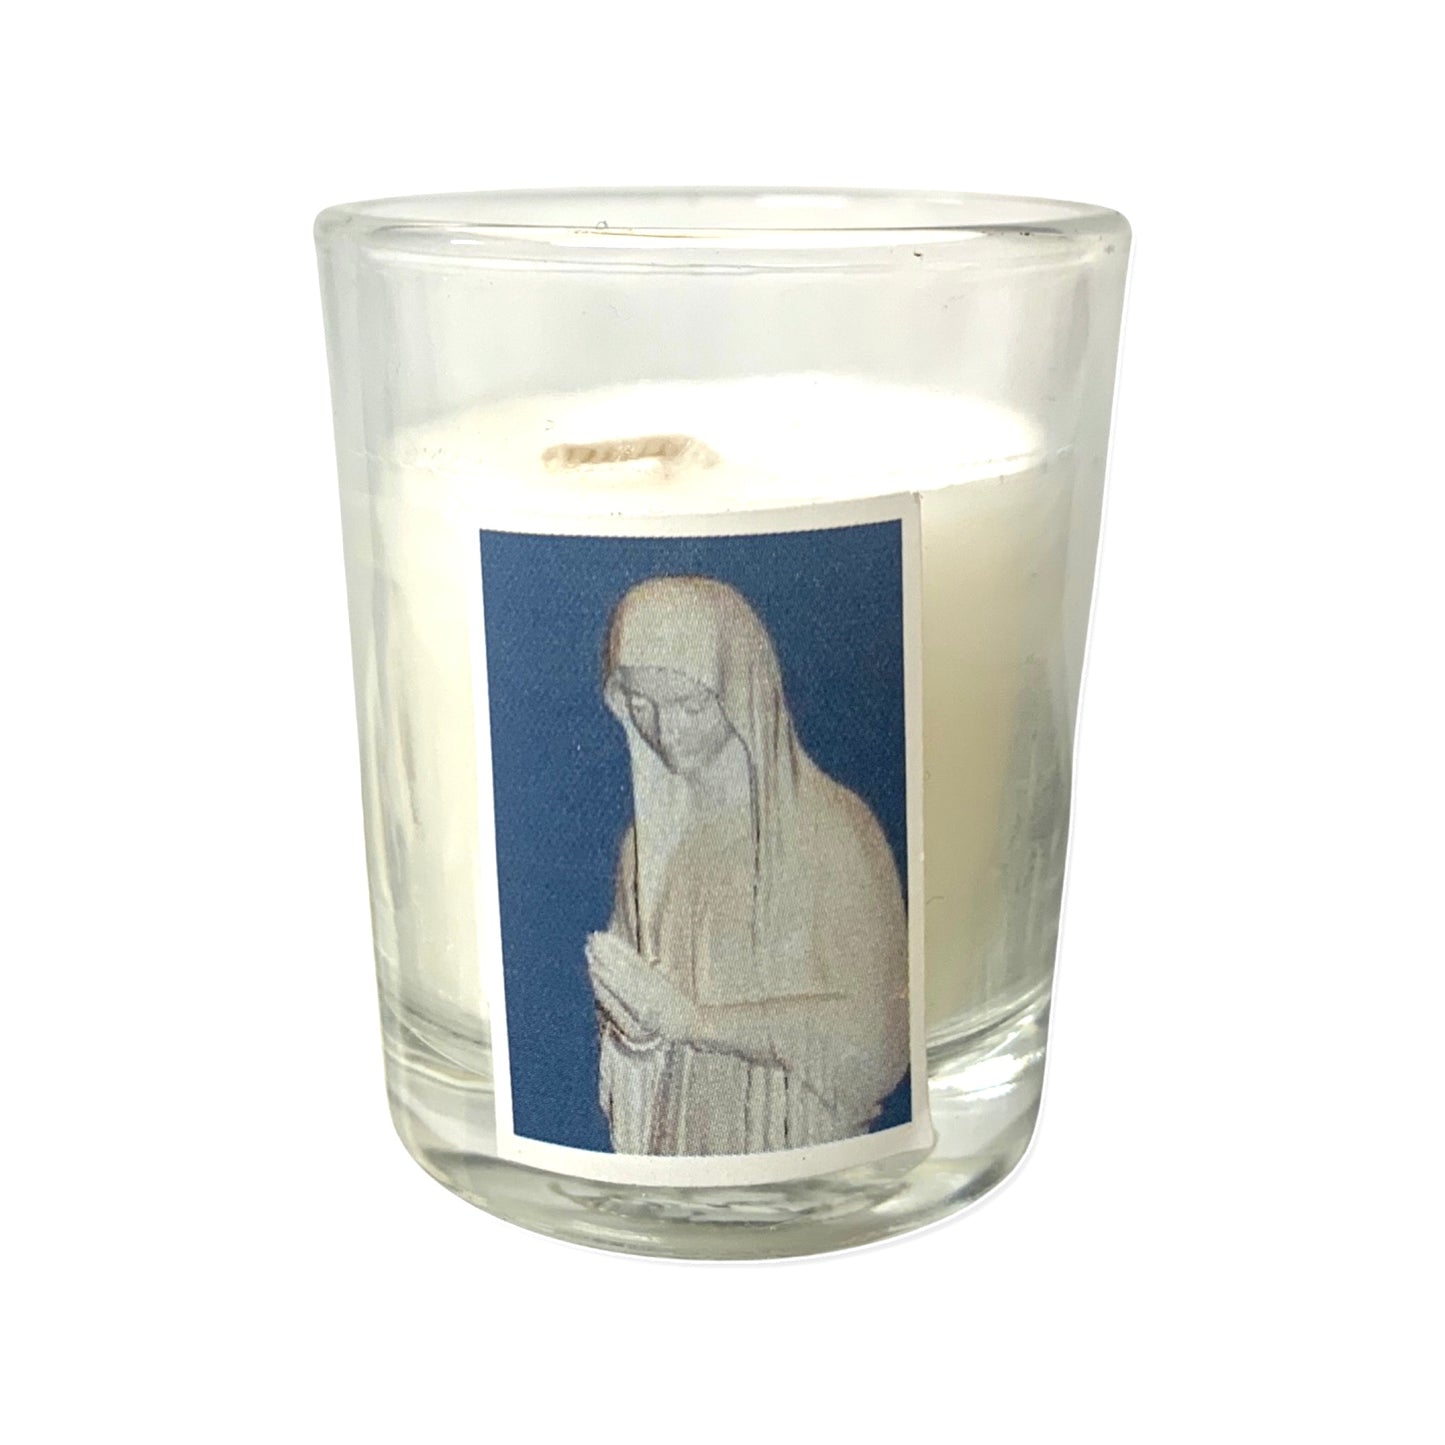 Our Lady of the Poor Prayer Candle